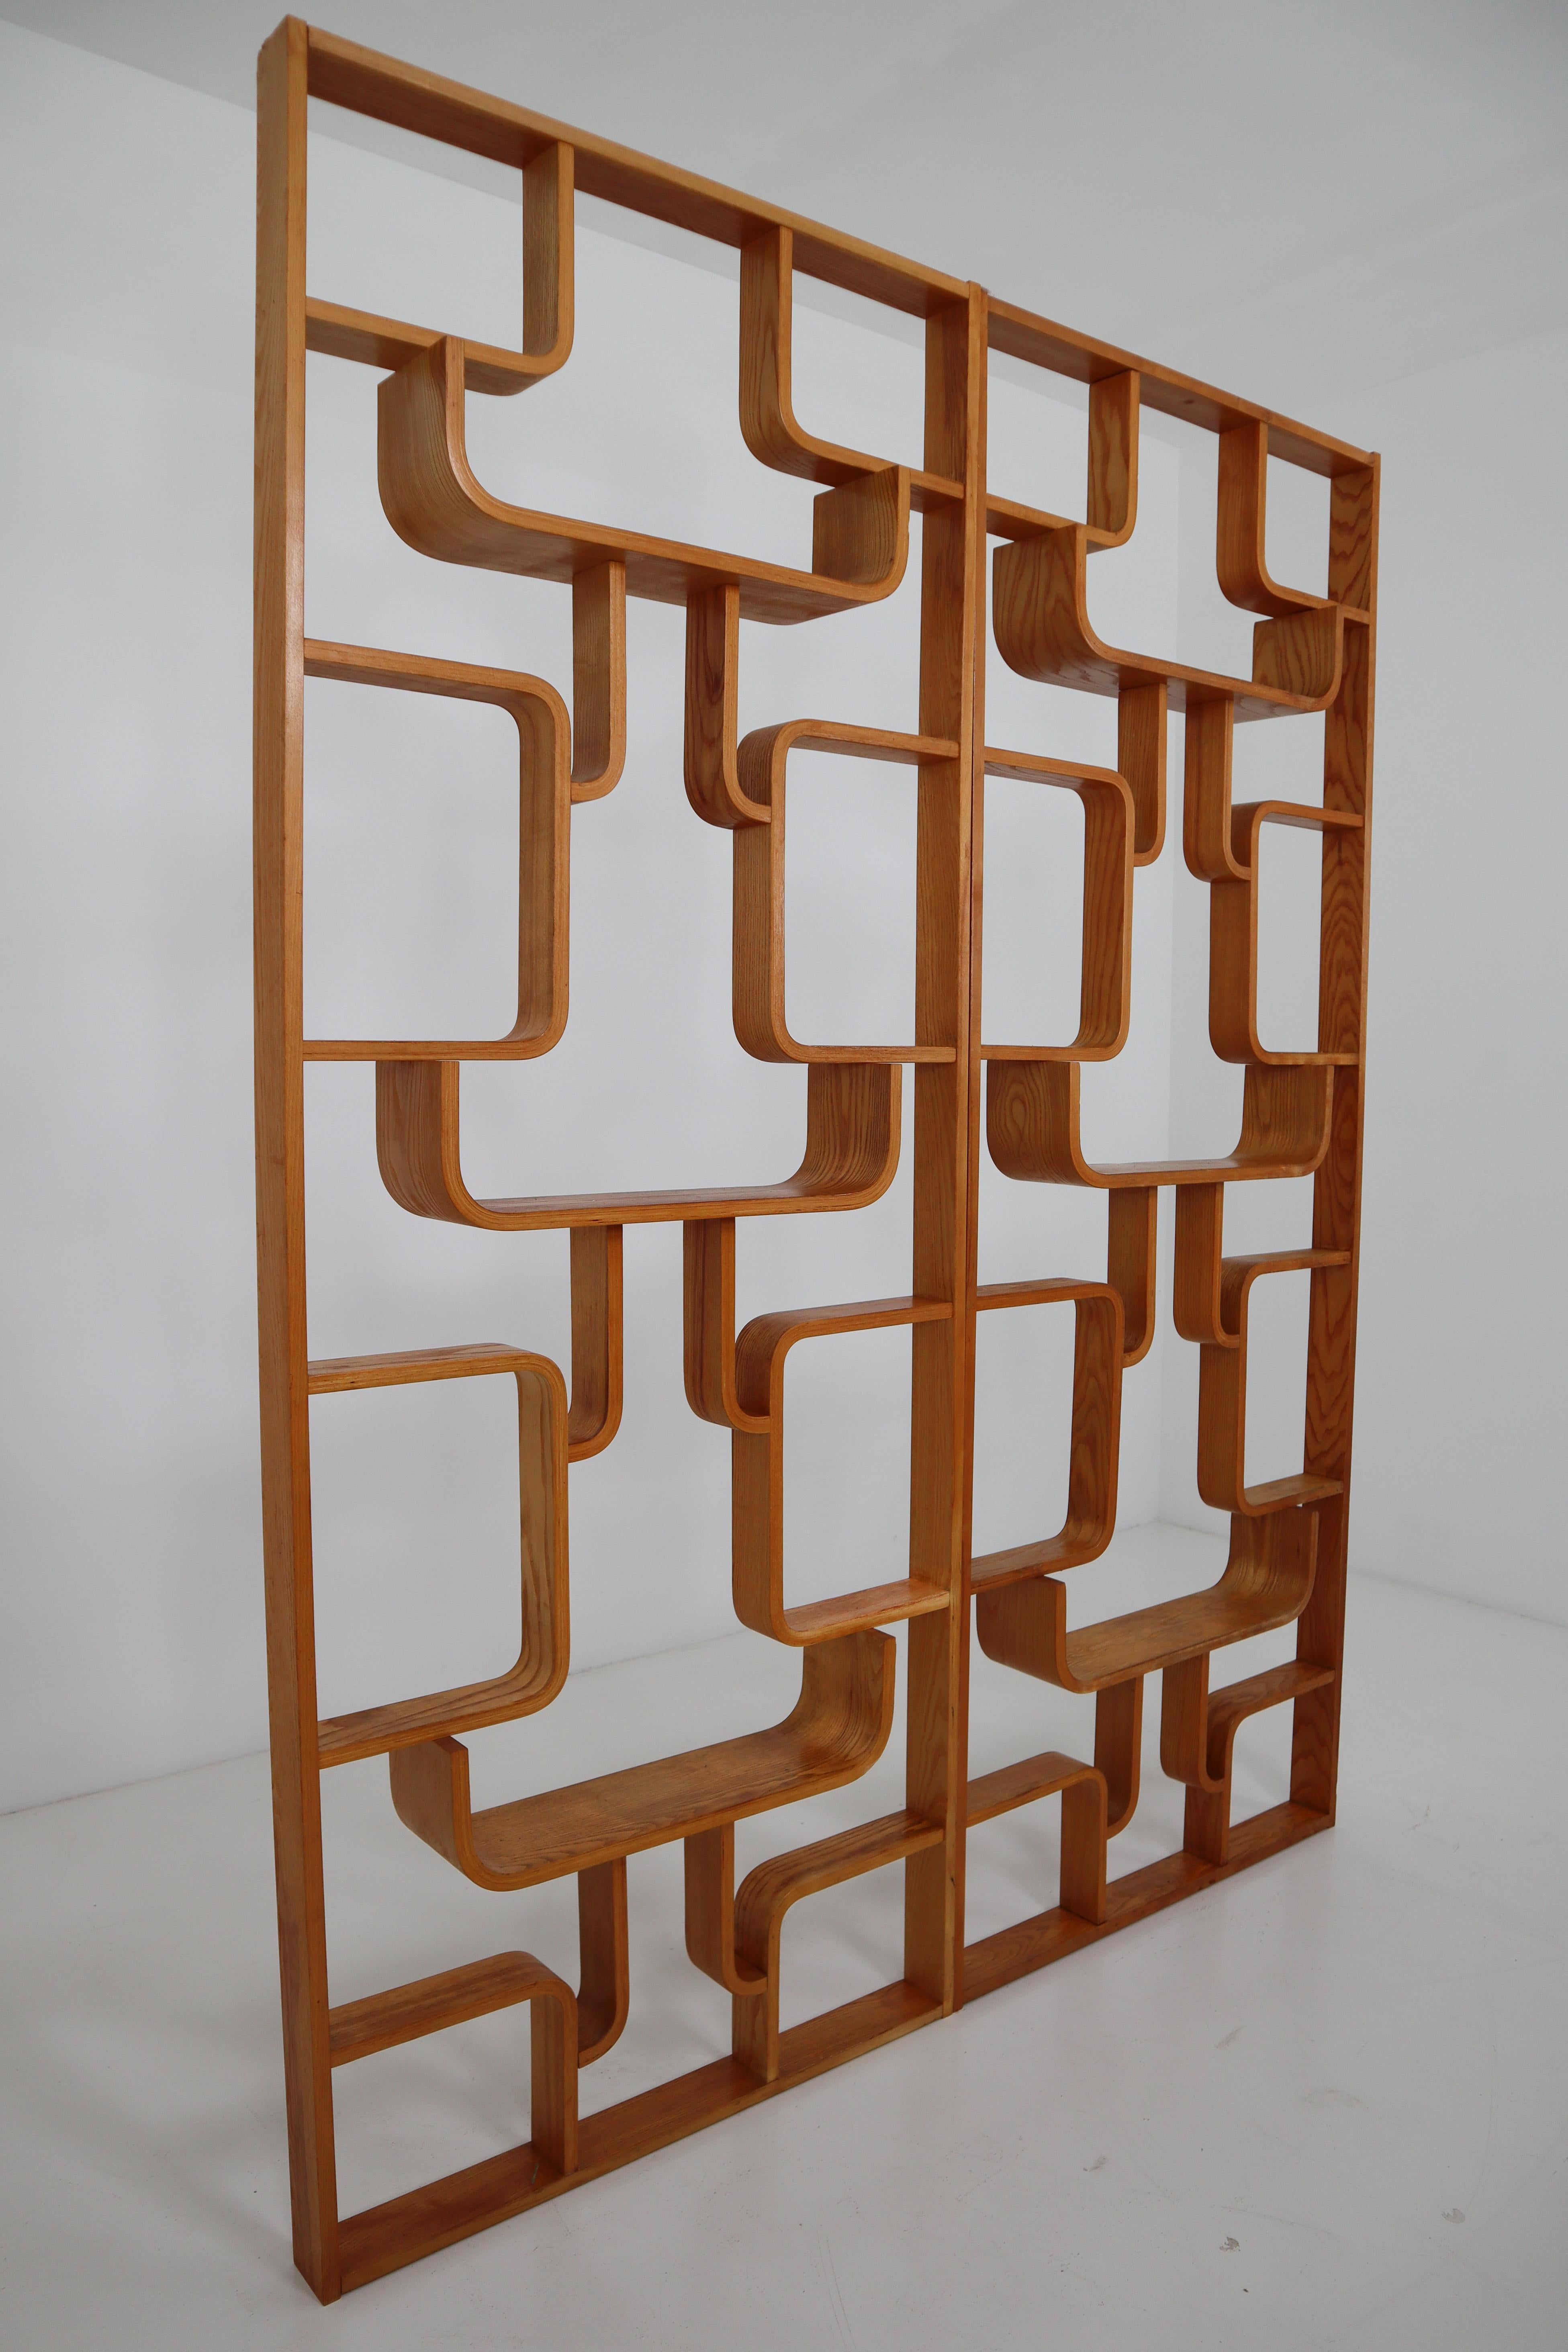 Midcentury flower (dividing) wall made of the bentwood plywood and features geometric patterns, designed by Ludvik Volak in the Czech Republic in the 1950s-1960s and manufactured by Thonet.
Amazing good condition and wonderful warm patina.

Note